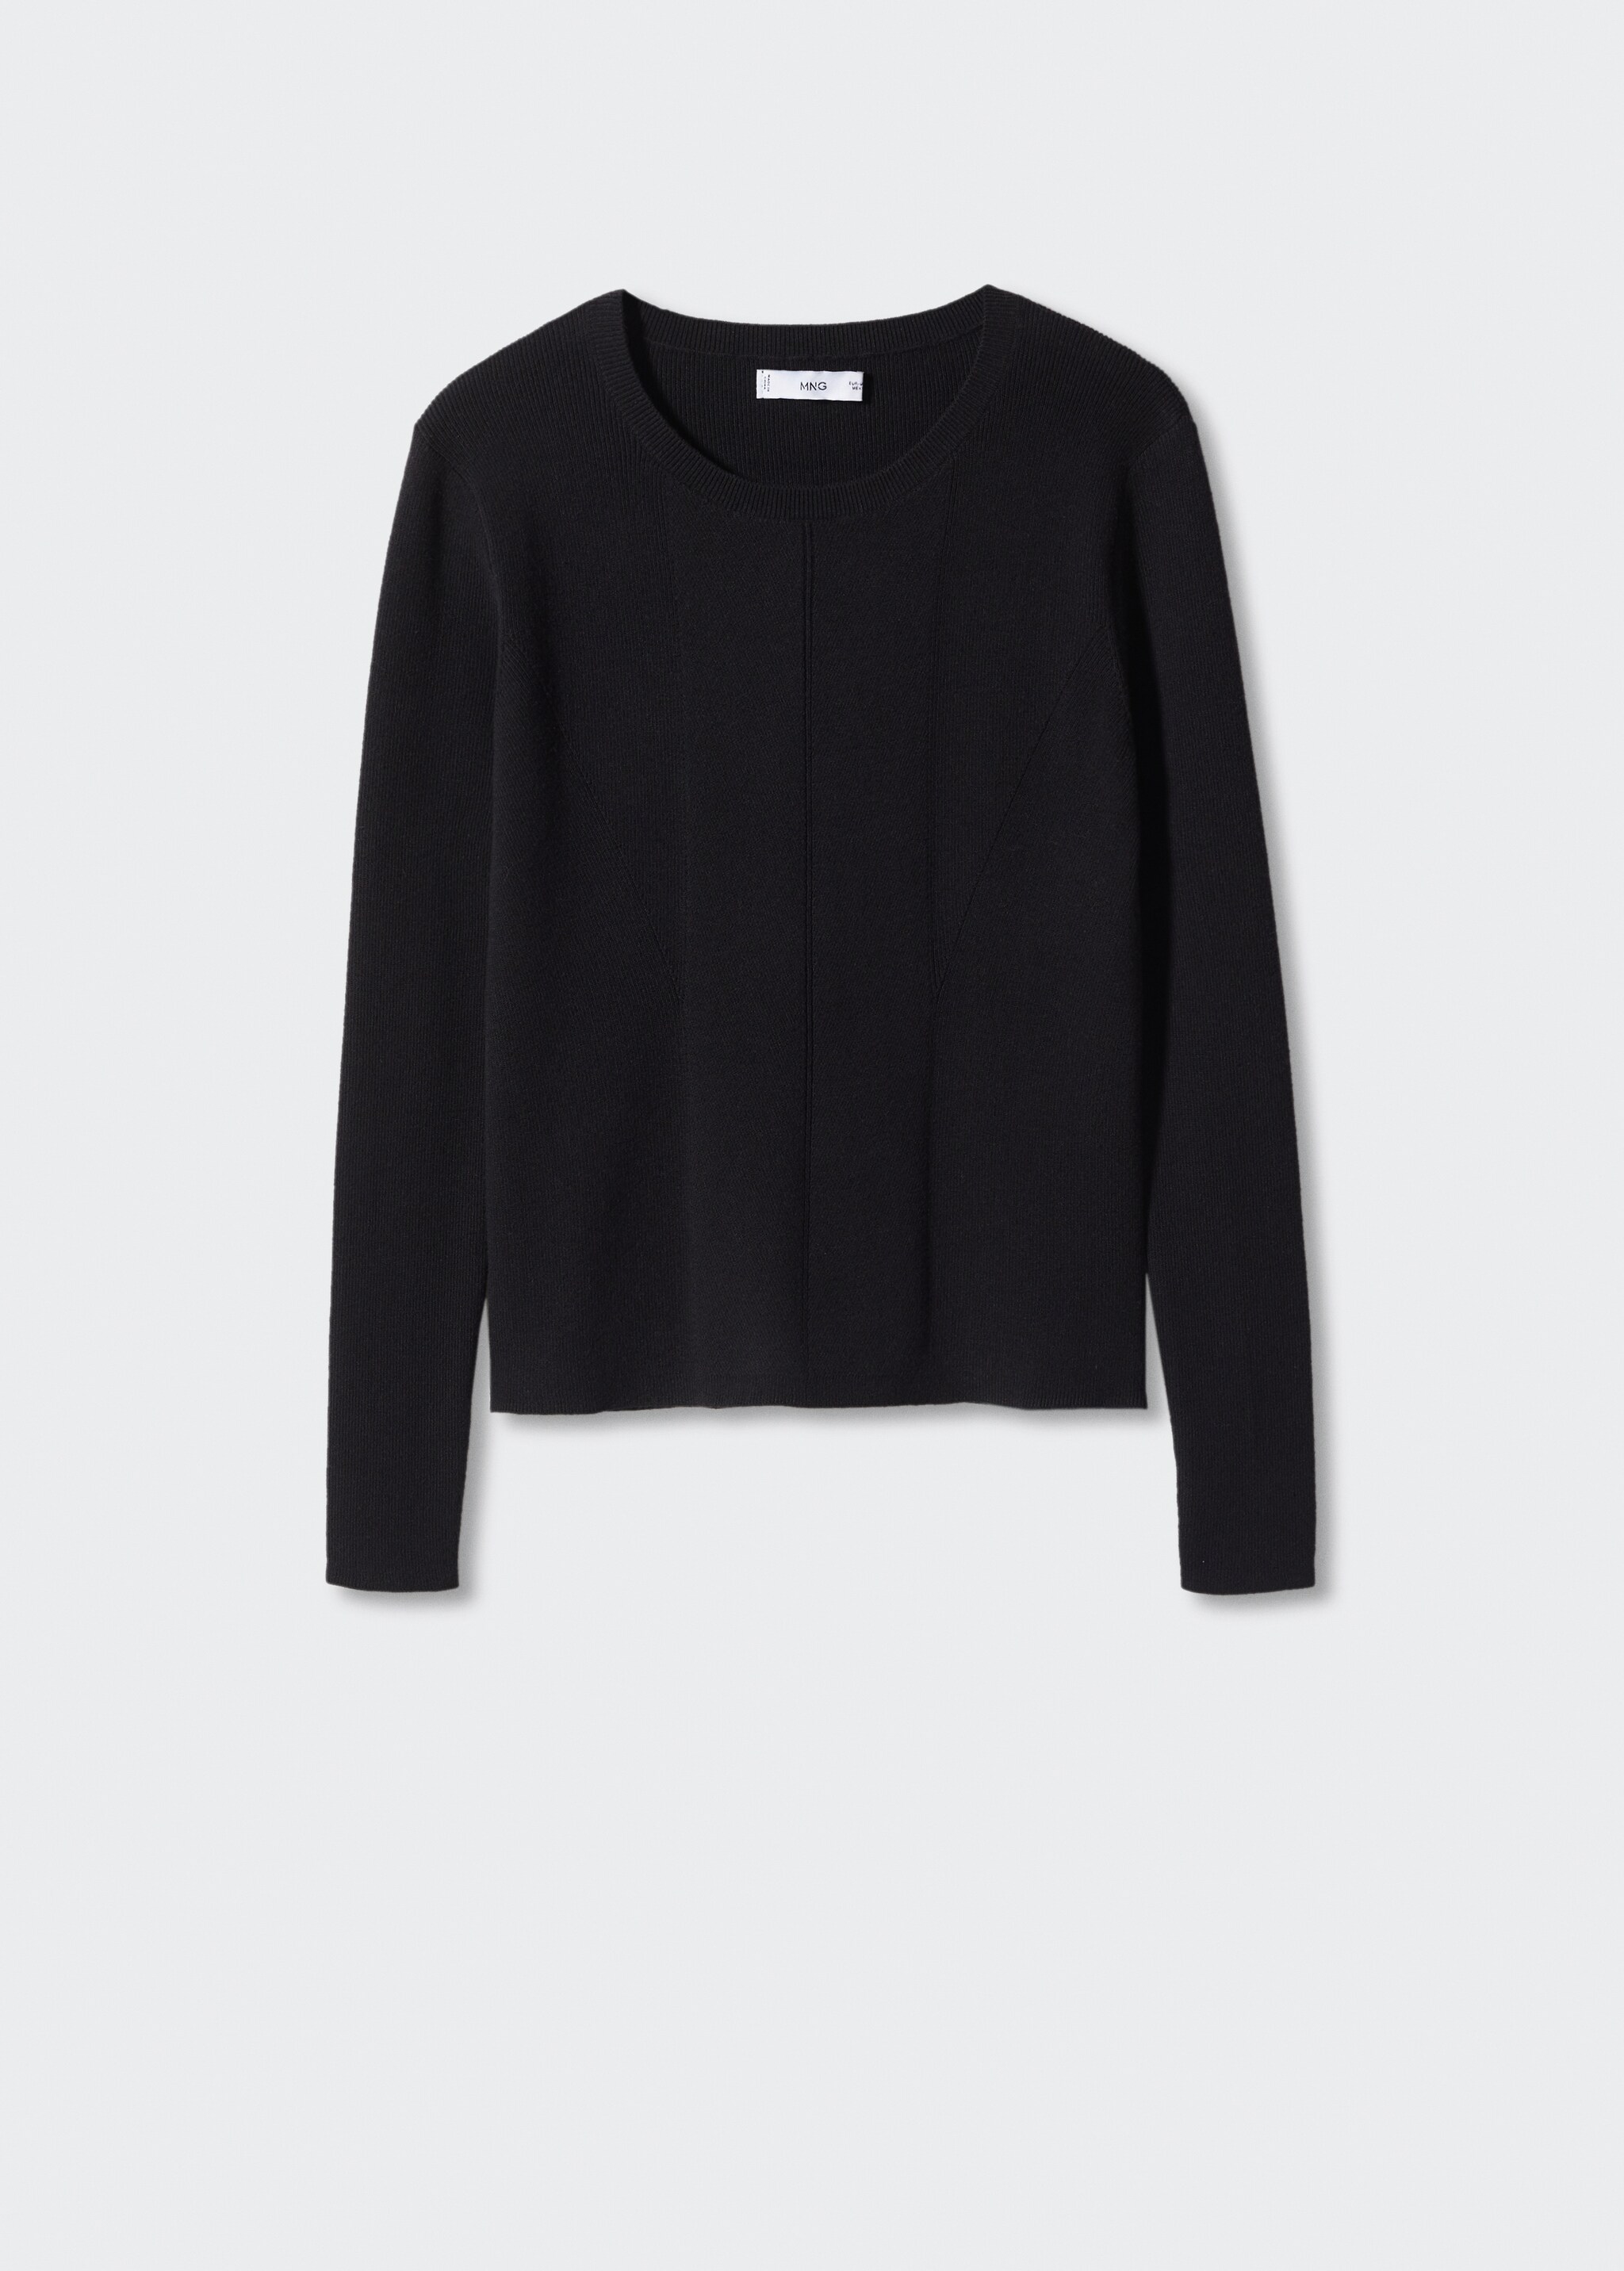 Textured round neck sweater - Article without model